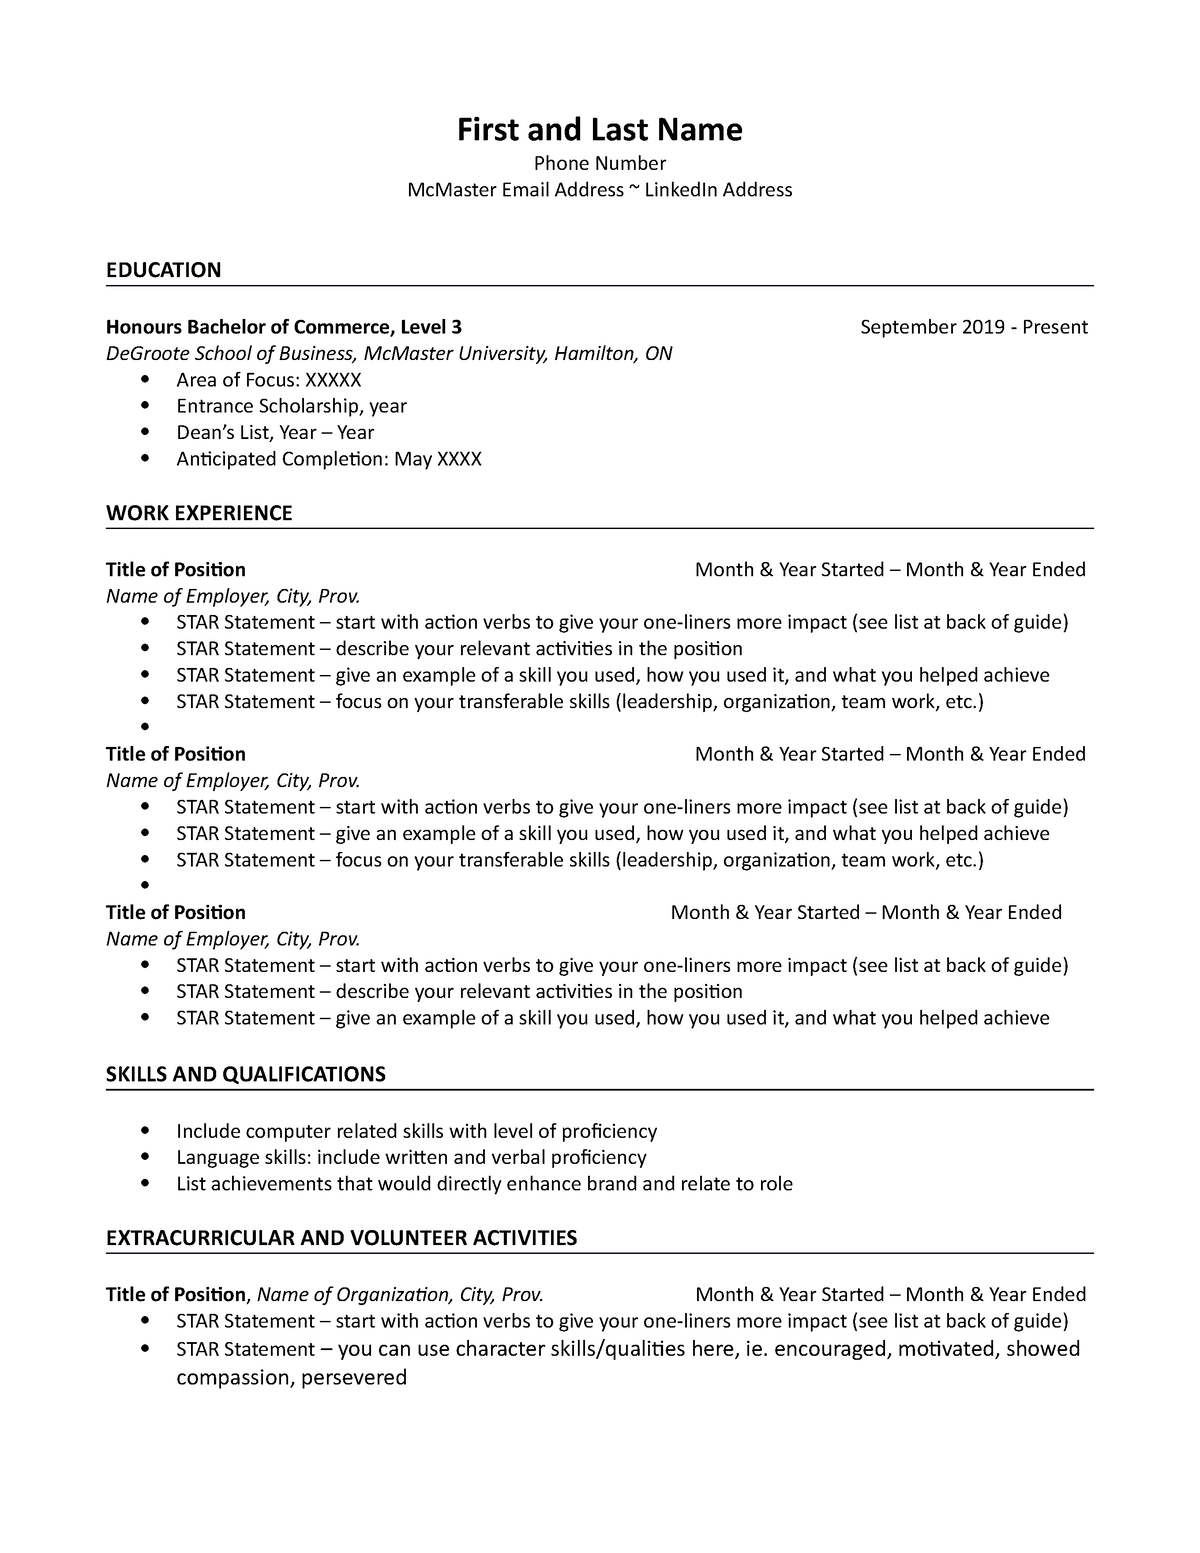 Resume Template 1 - Career Practice - First and Last Name Phone Number ...